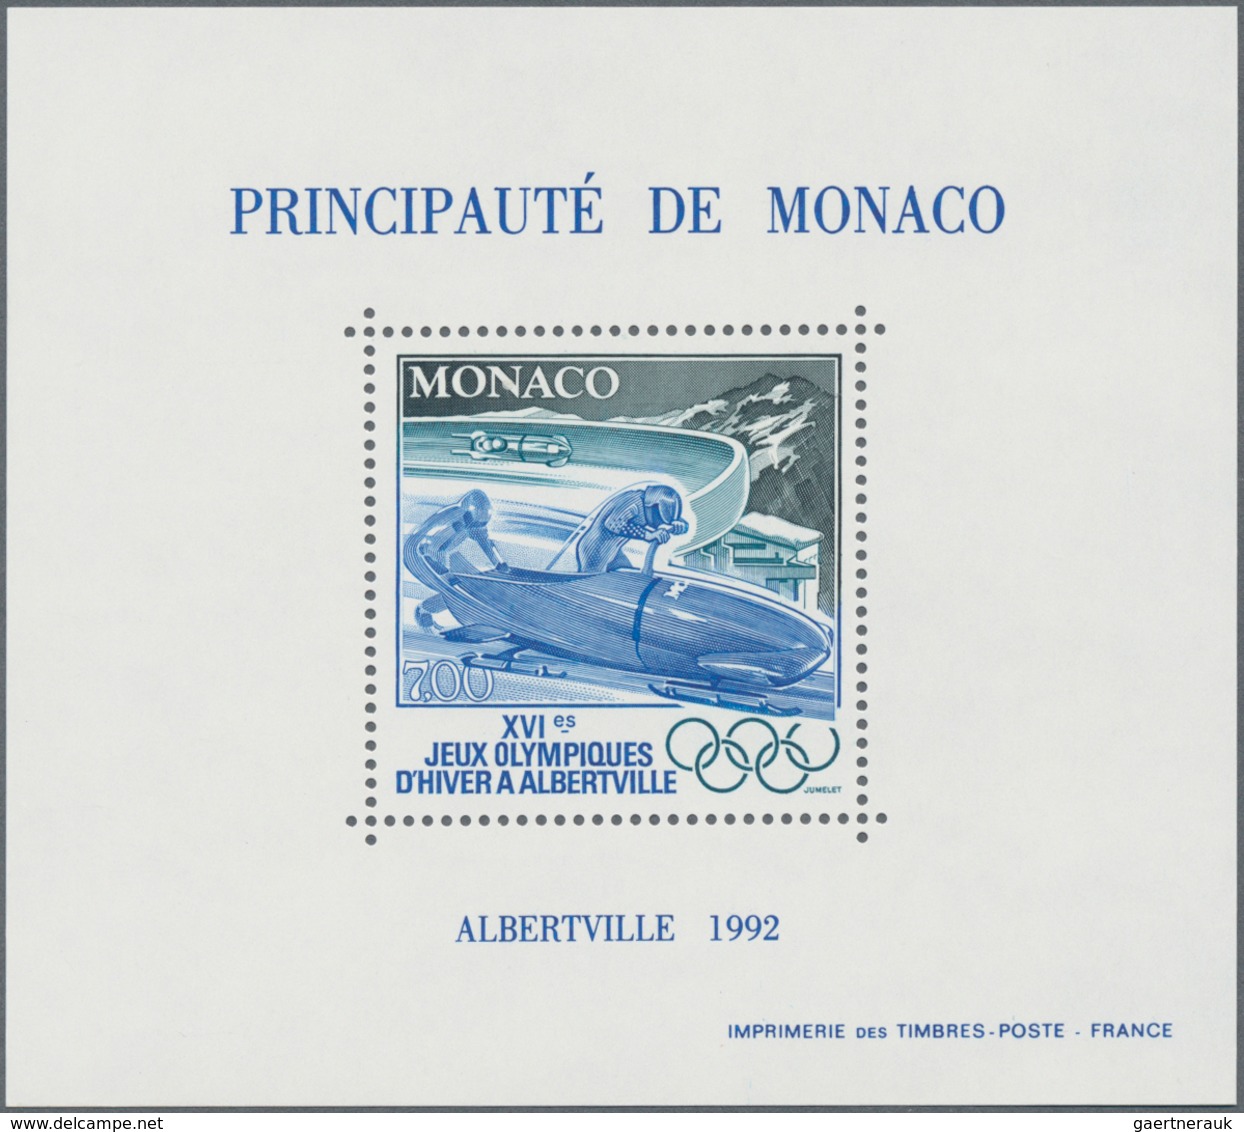 Monaco: 1992, Summer and Winter Olympics Barcelona and Albertville perforated and IMPERFORATE specia